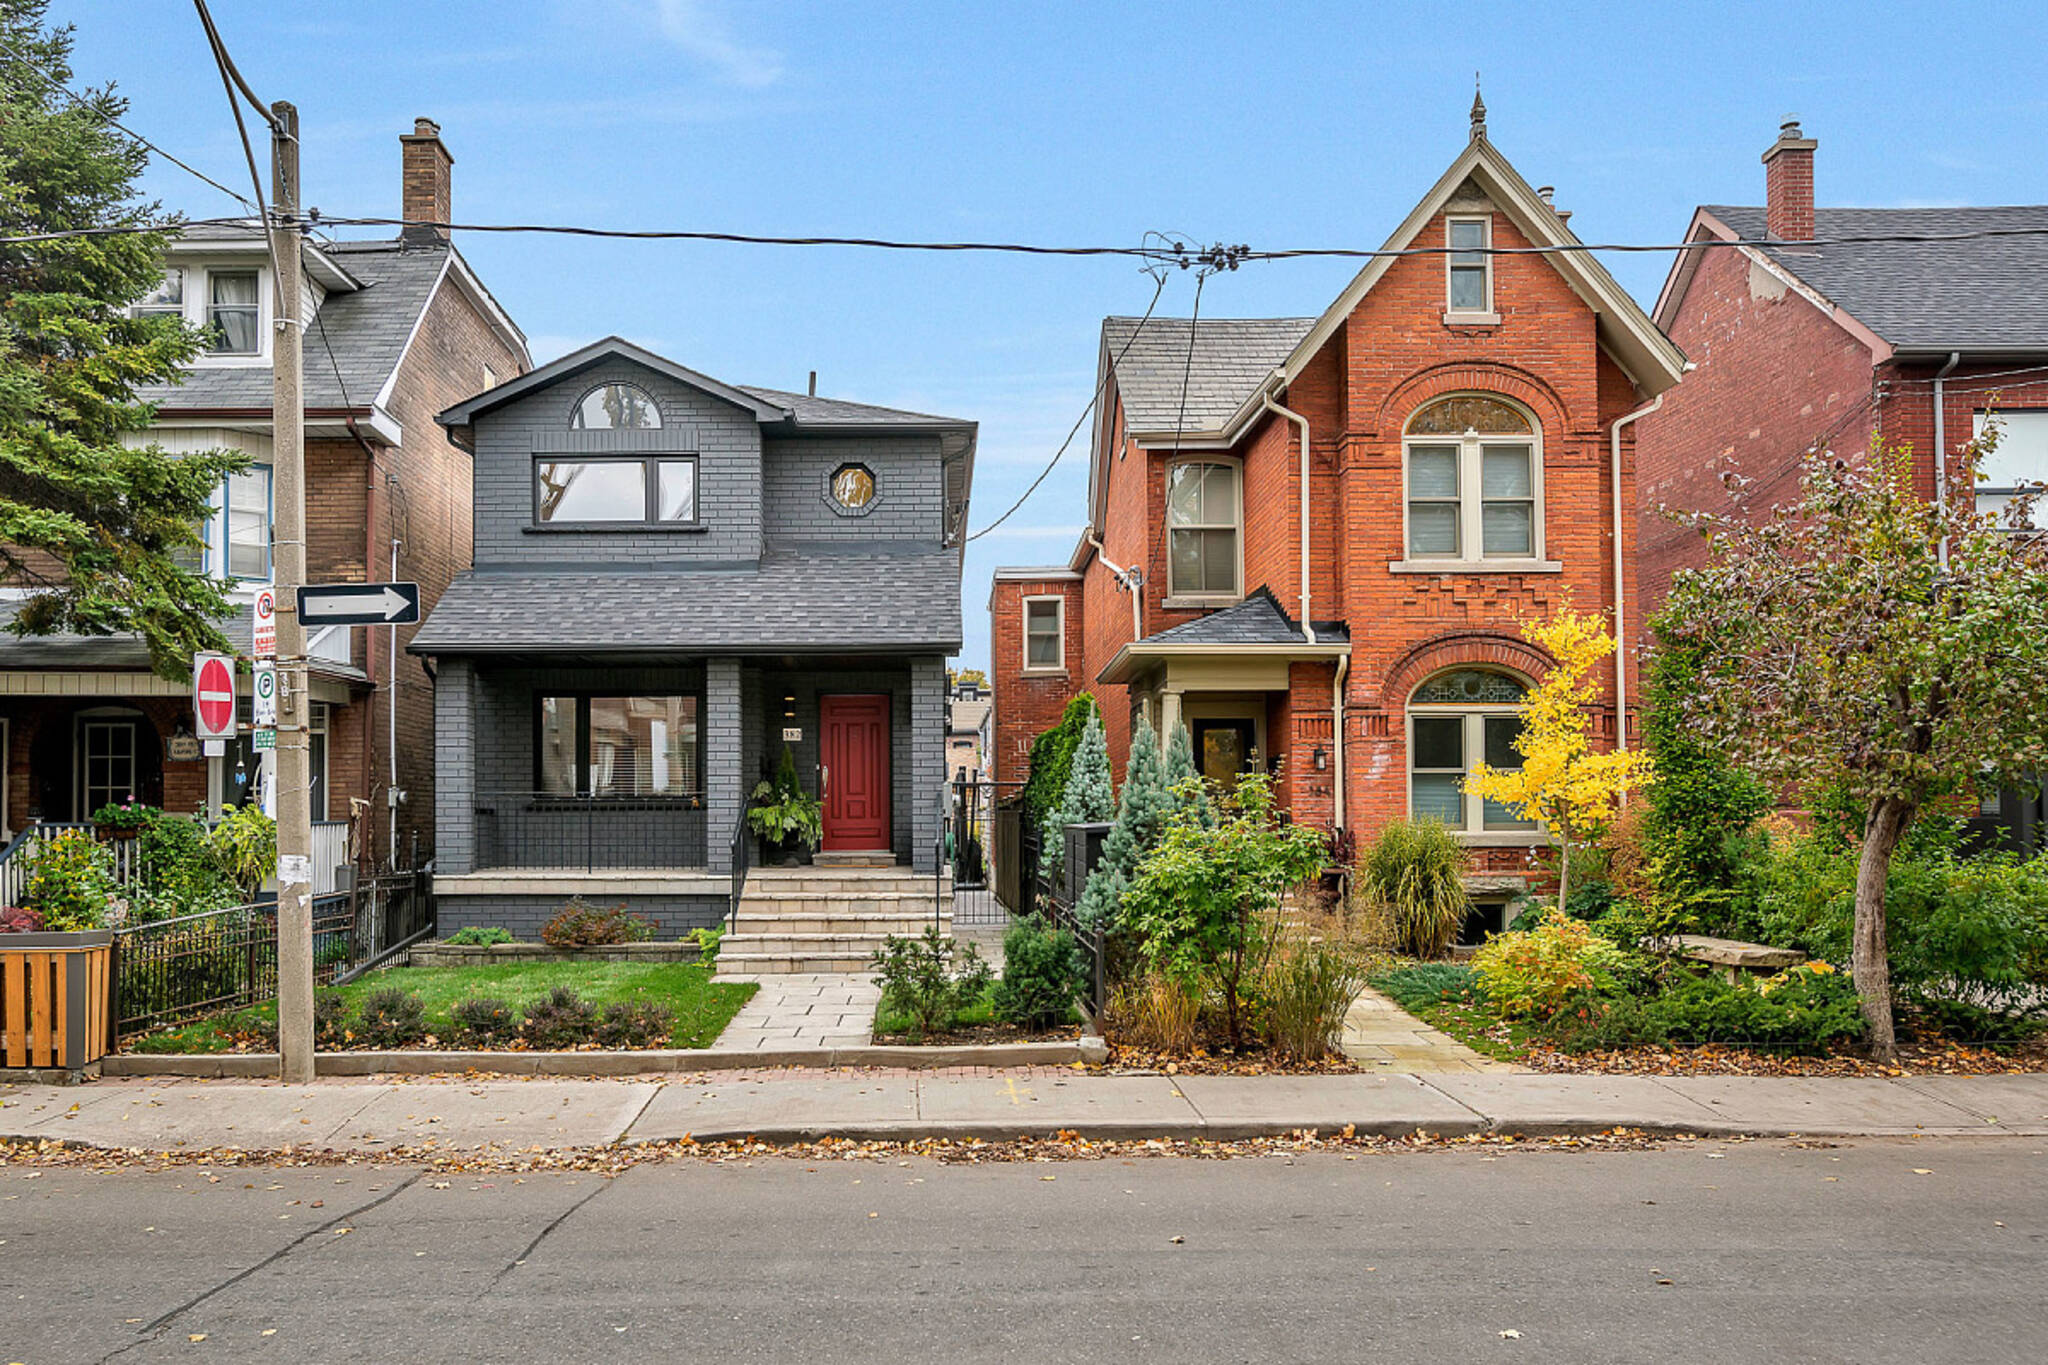 Detached house prices in Toronto took a dive last month